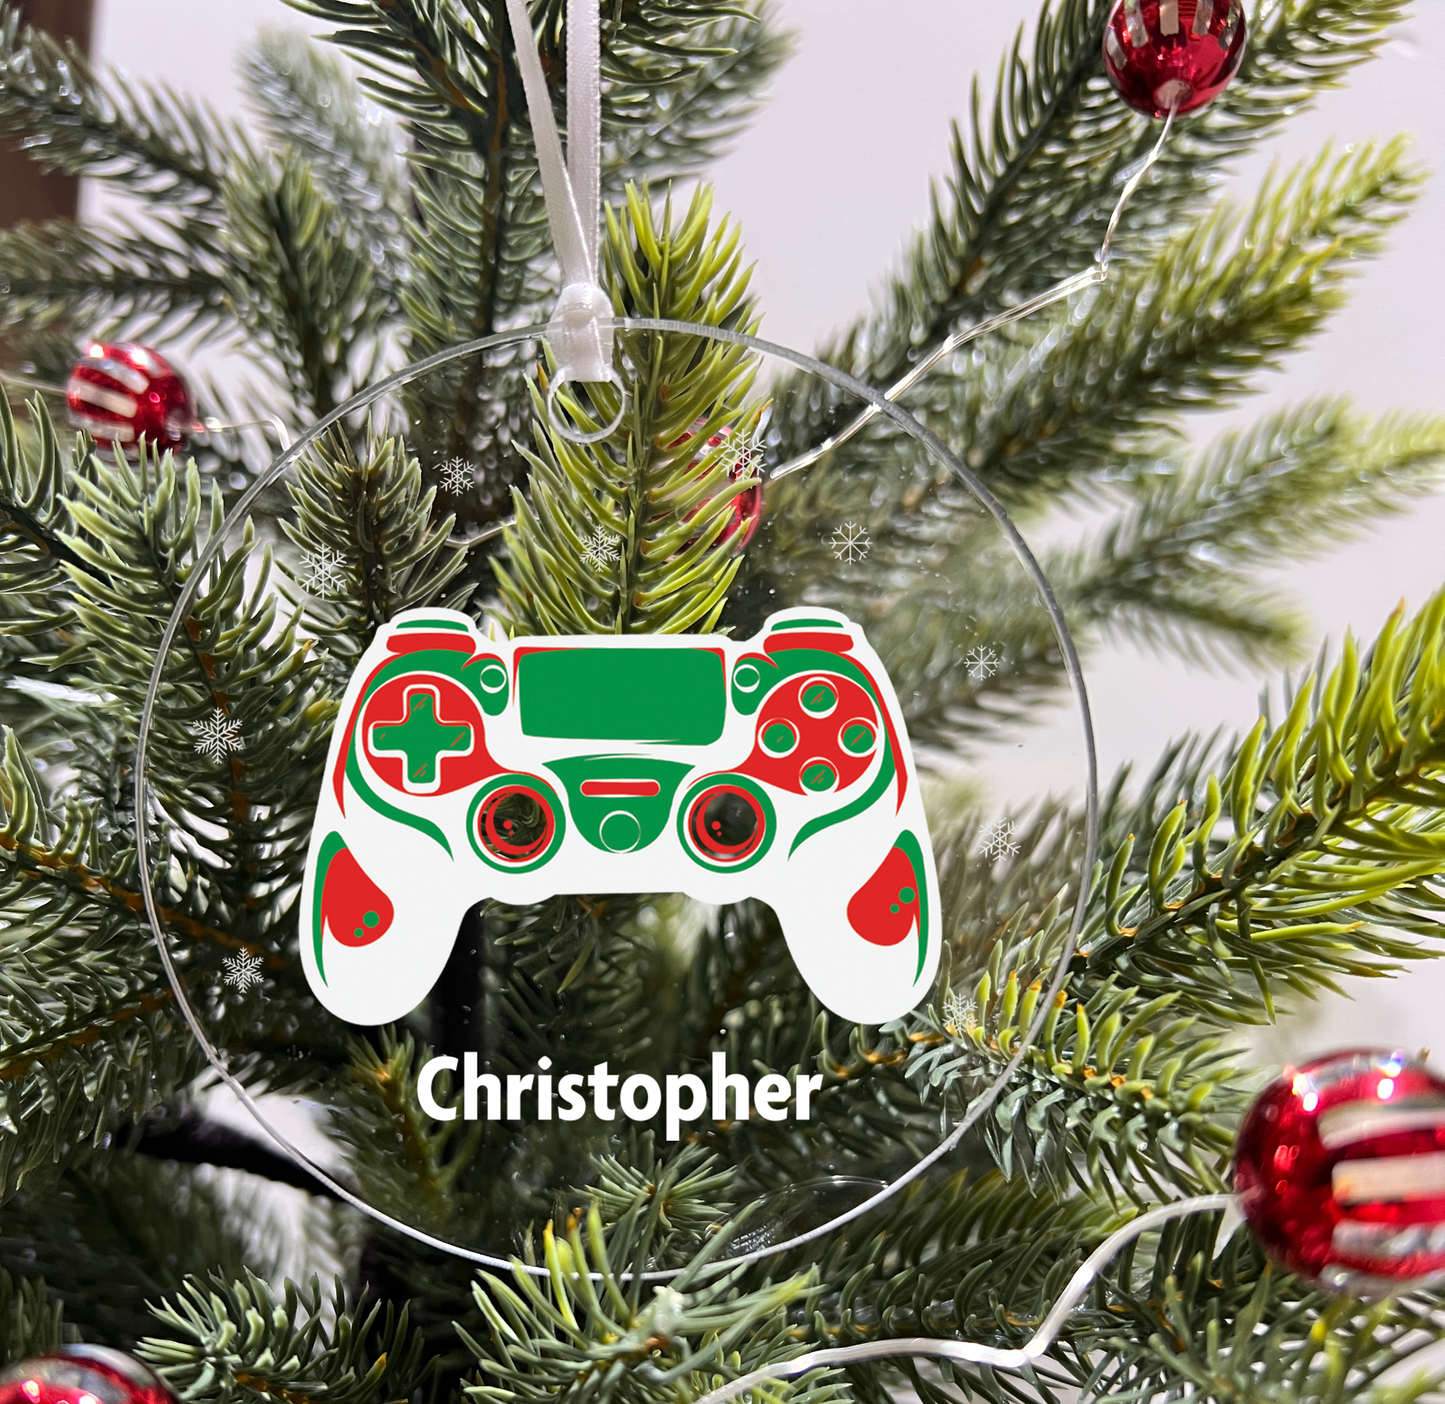 Gamer Controller Ornament with Personalized Engraved Name